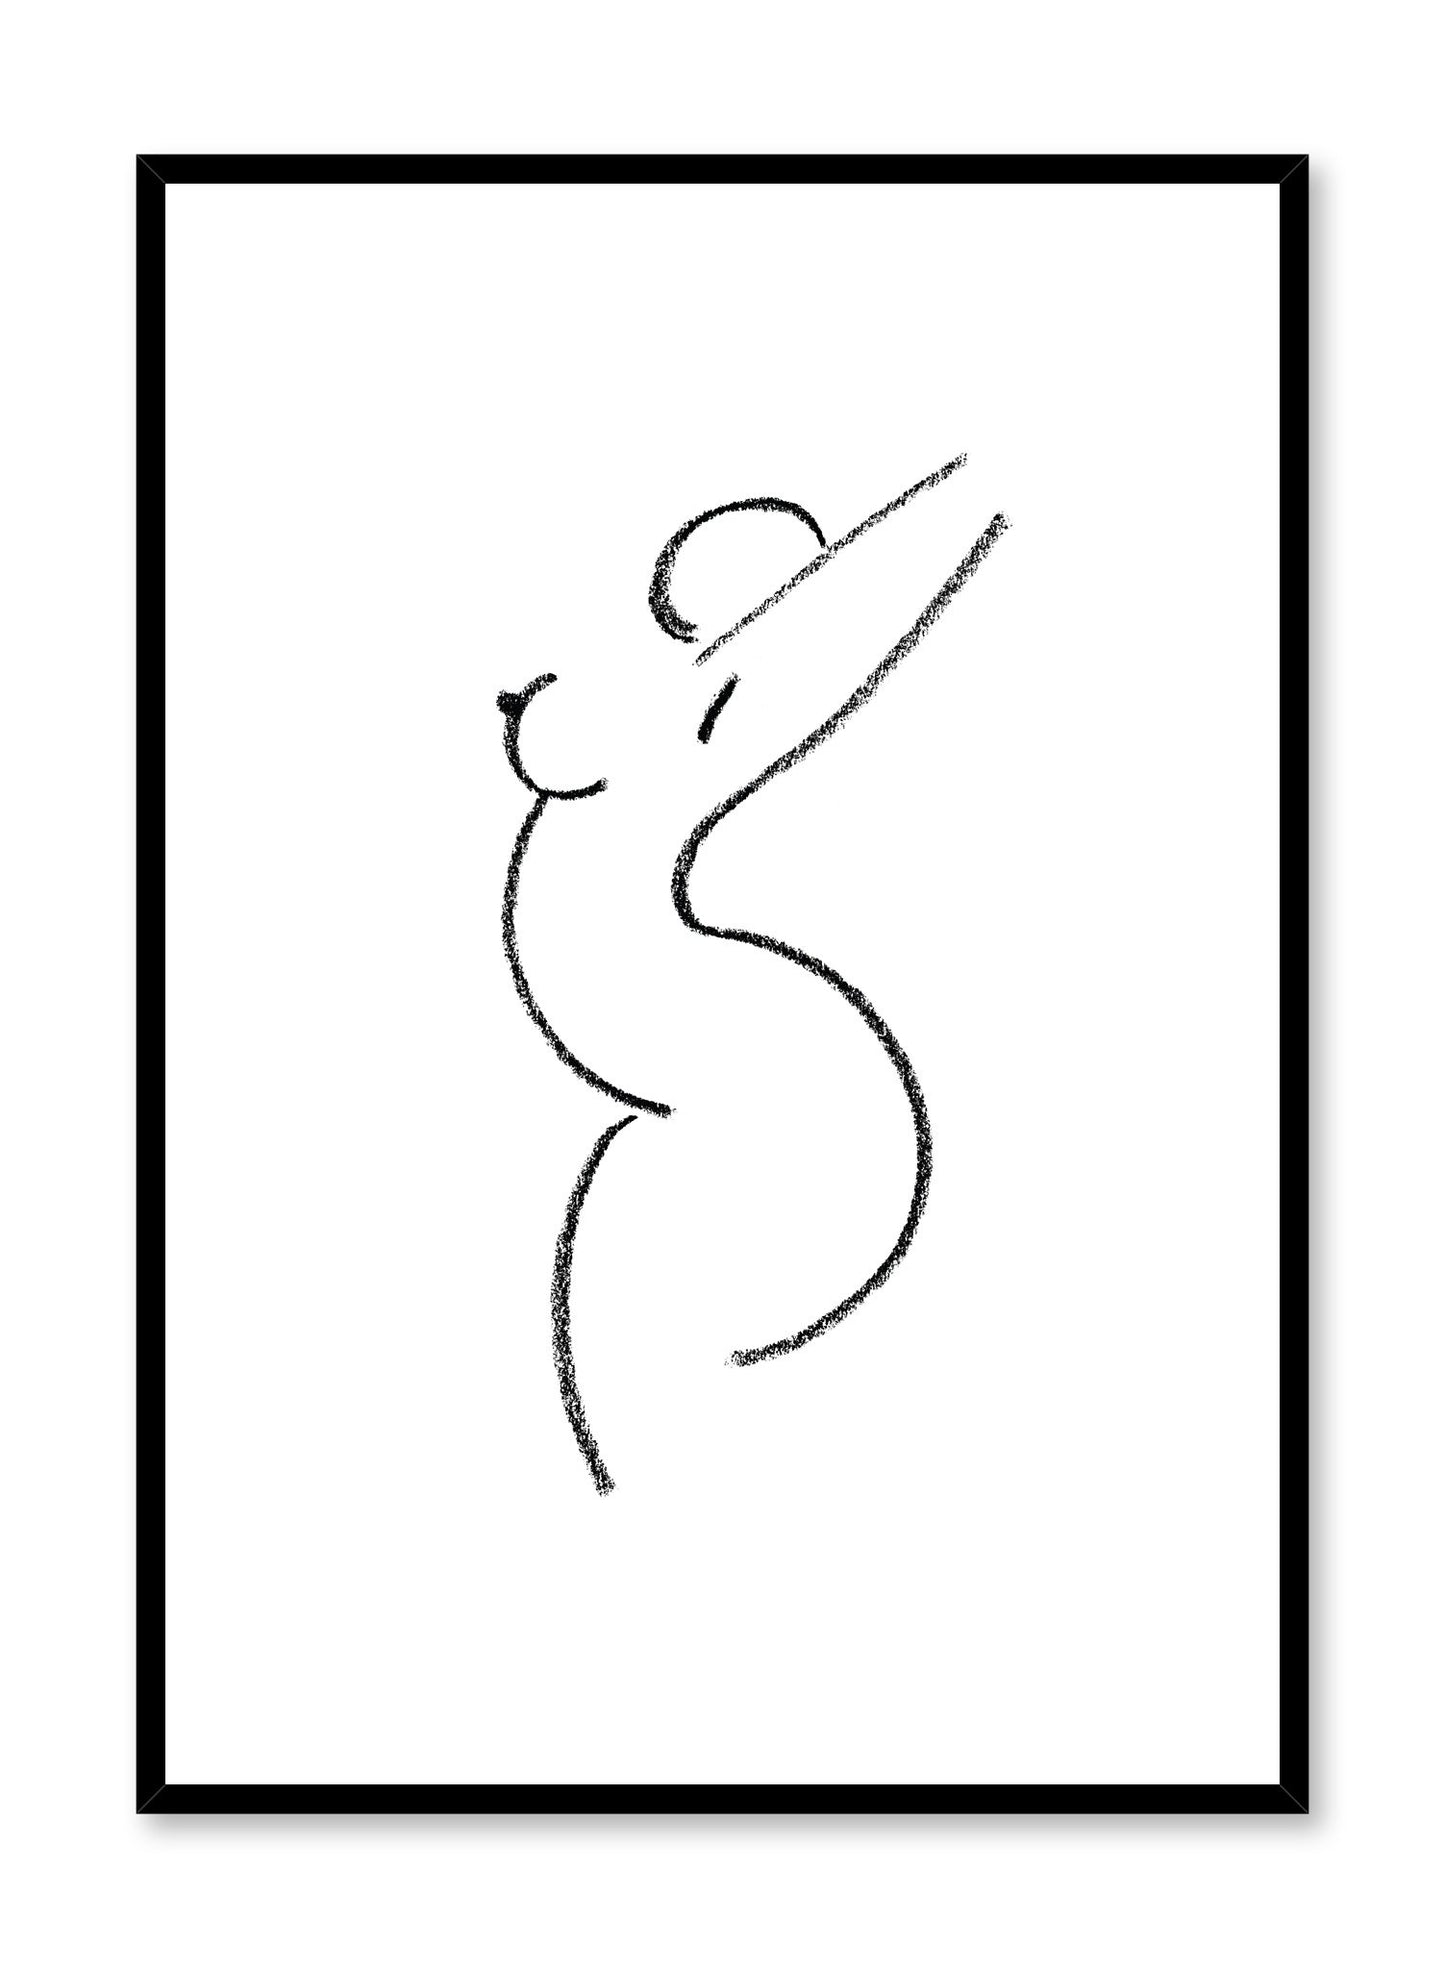 Modern minimalist poster by Opposite Wall with abstract line art illustration of Feminine Curves